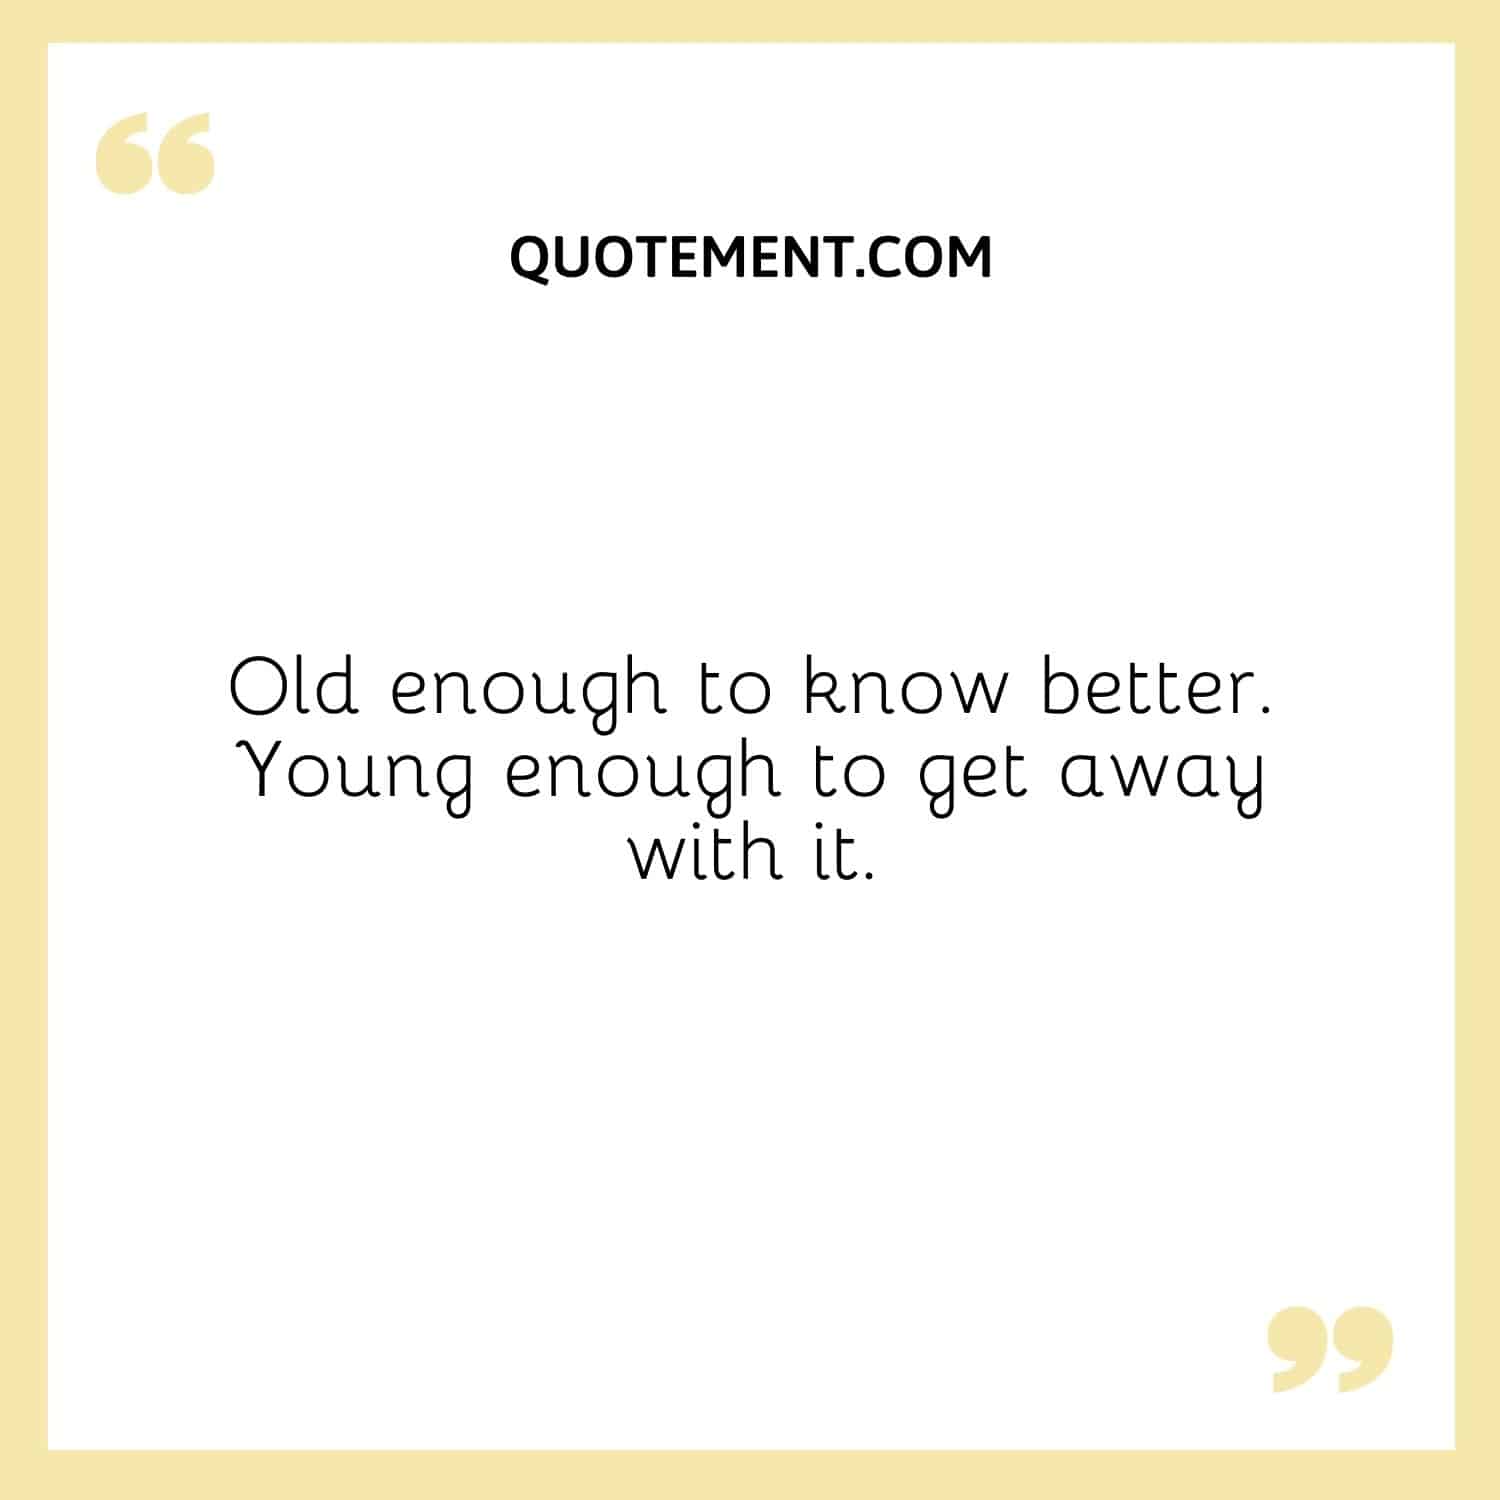 Old enough to know better